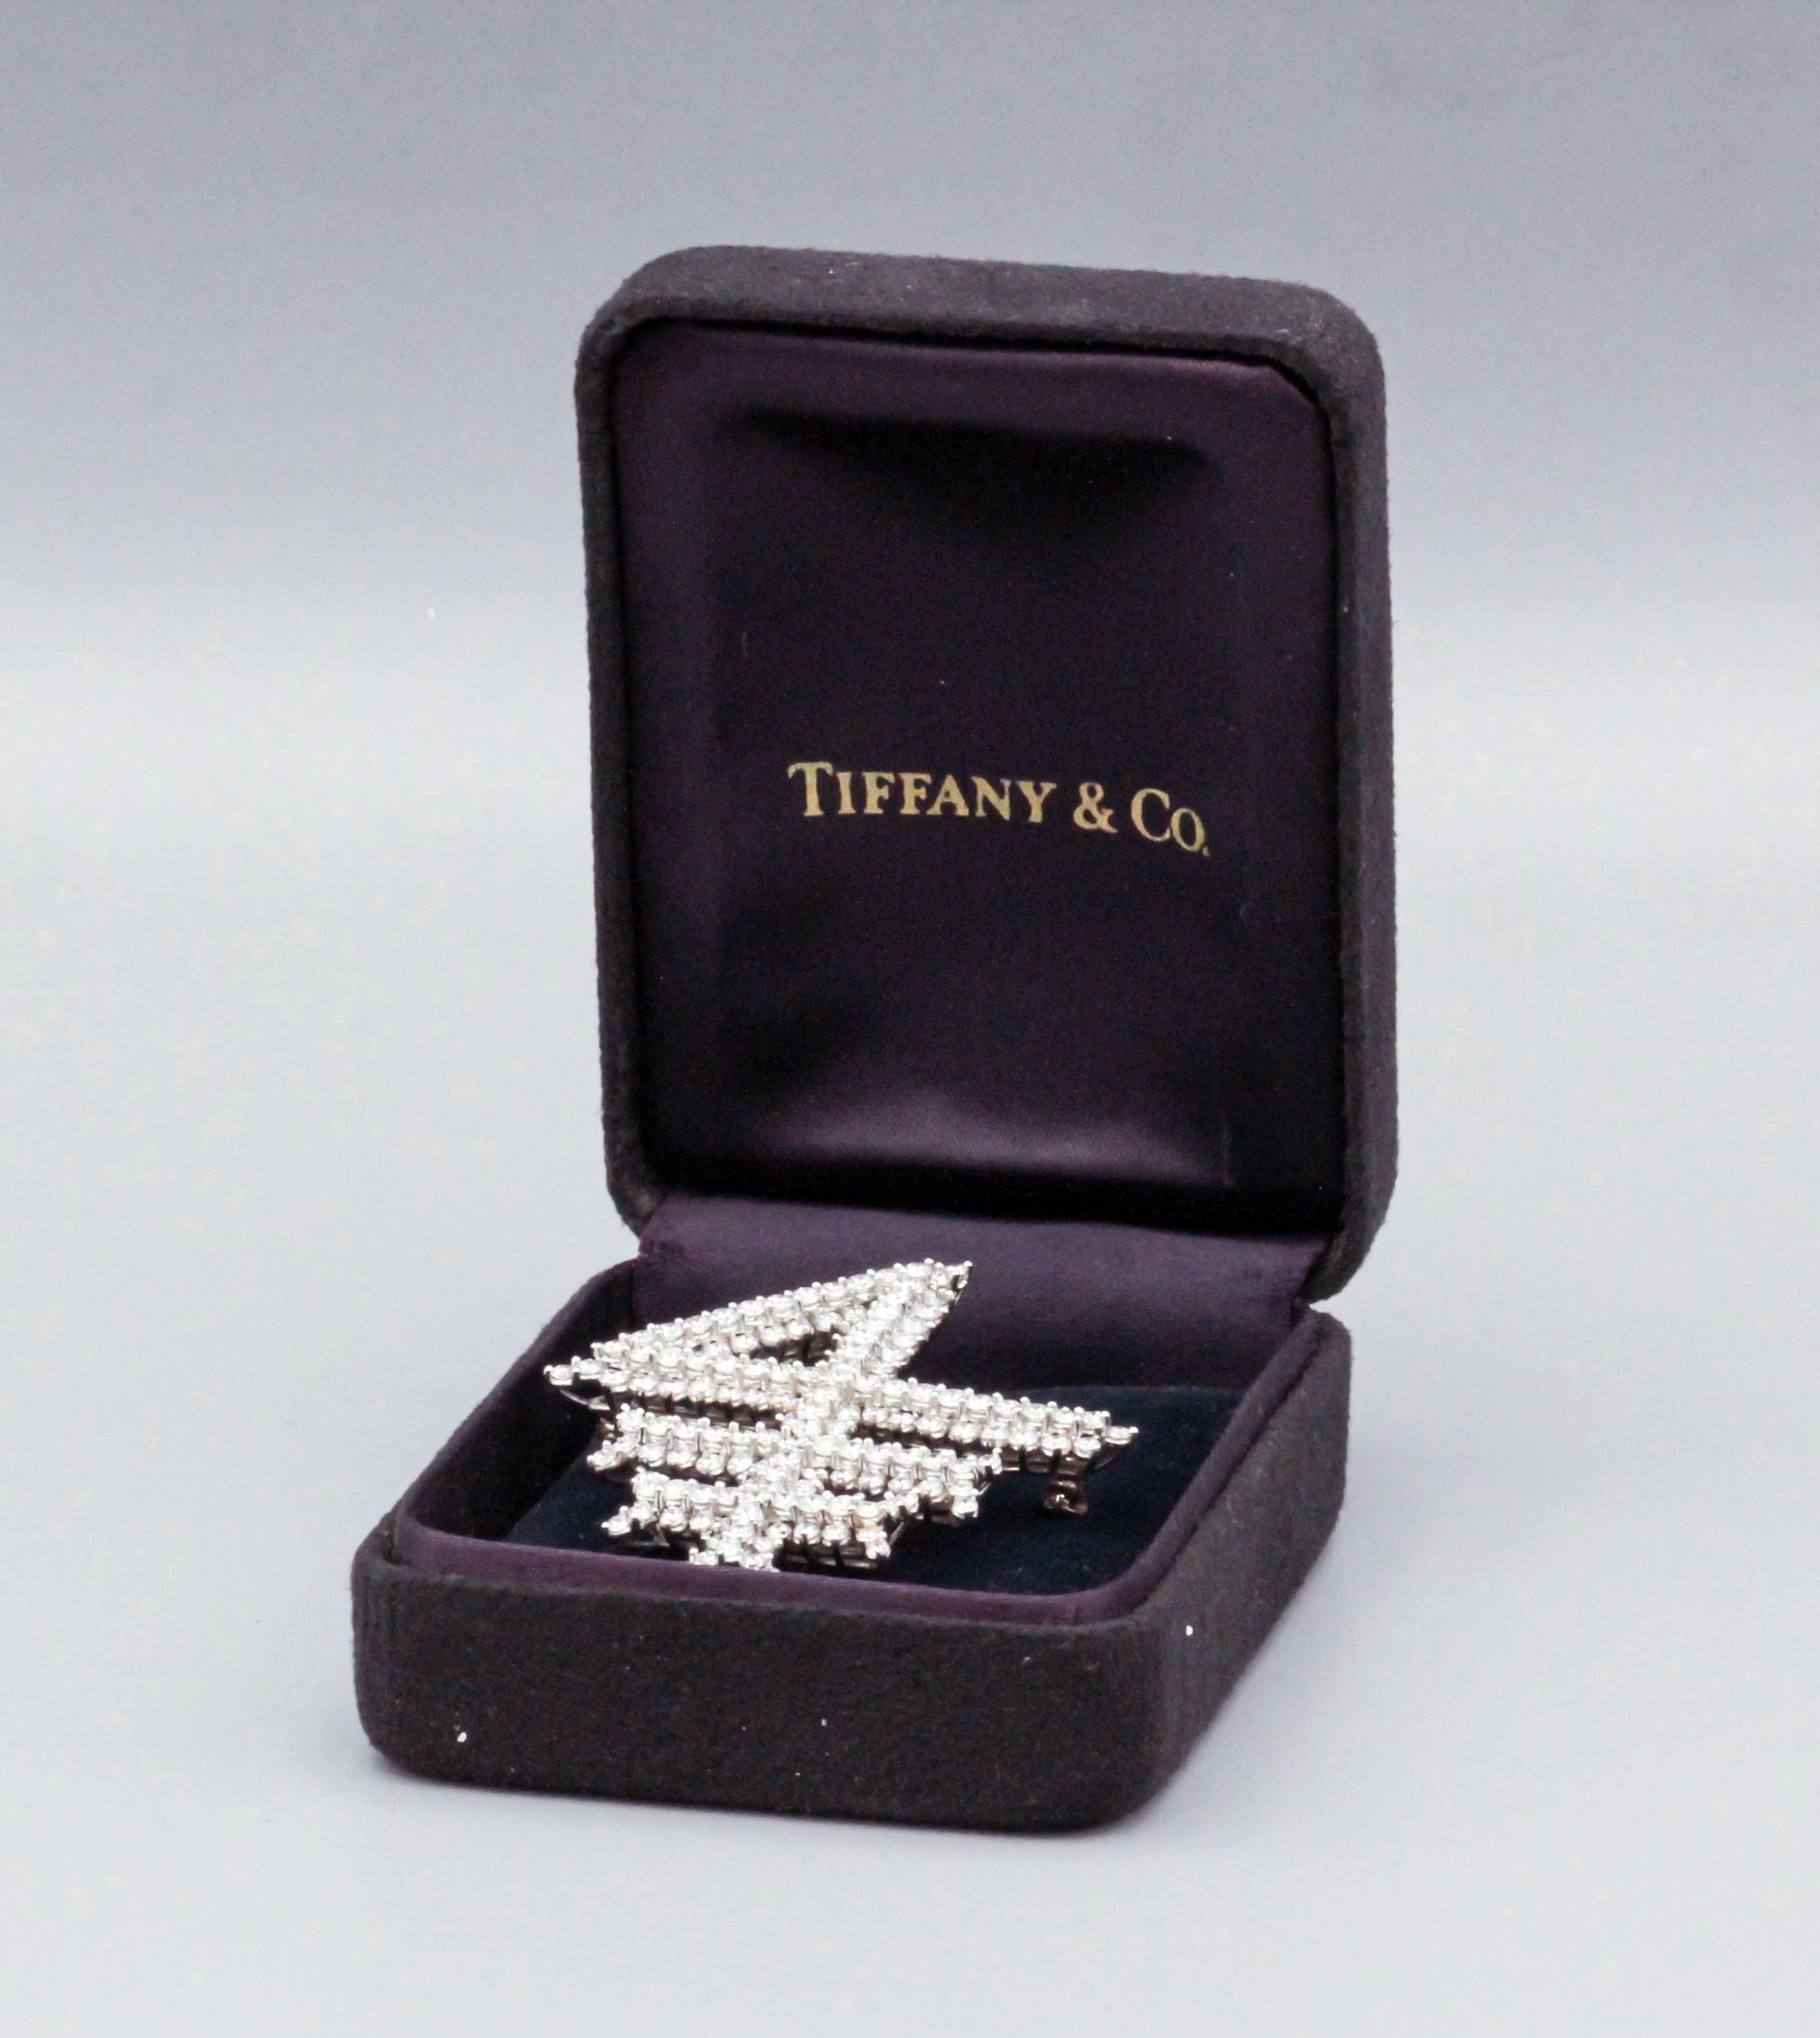 For your consideration, a fine a rare Tiffany & Co. diamond and platinum brooch made in the likeness of the Columbia Business School logo.  Quite possibly a unique piece. 

This fine diamond and platinum Tiffany & Co. brooch, circa 1990s, is a